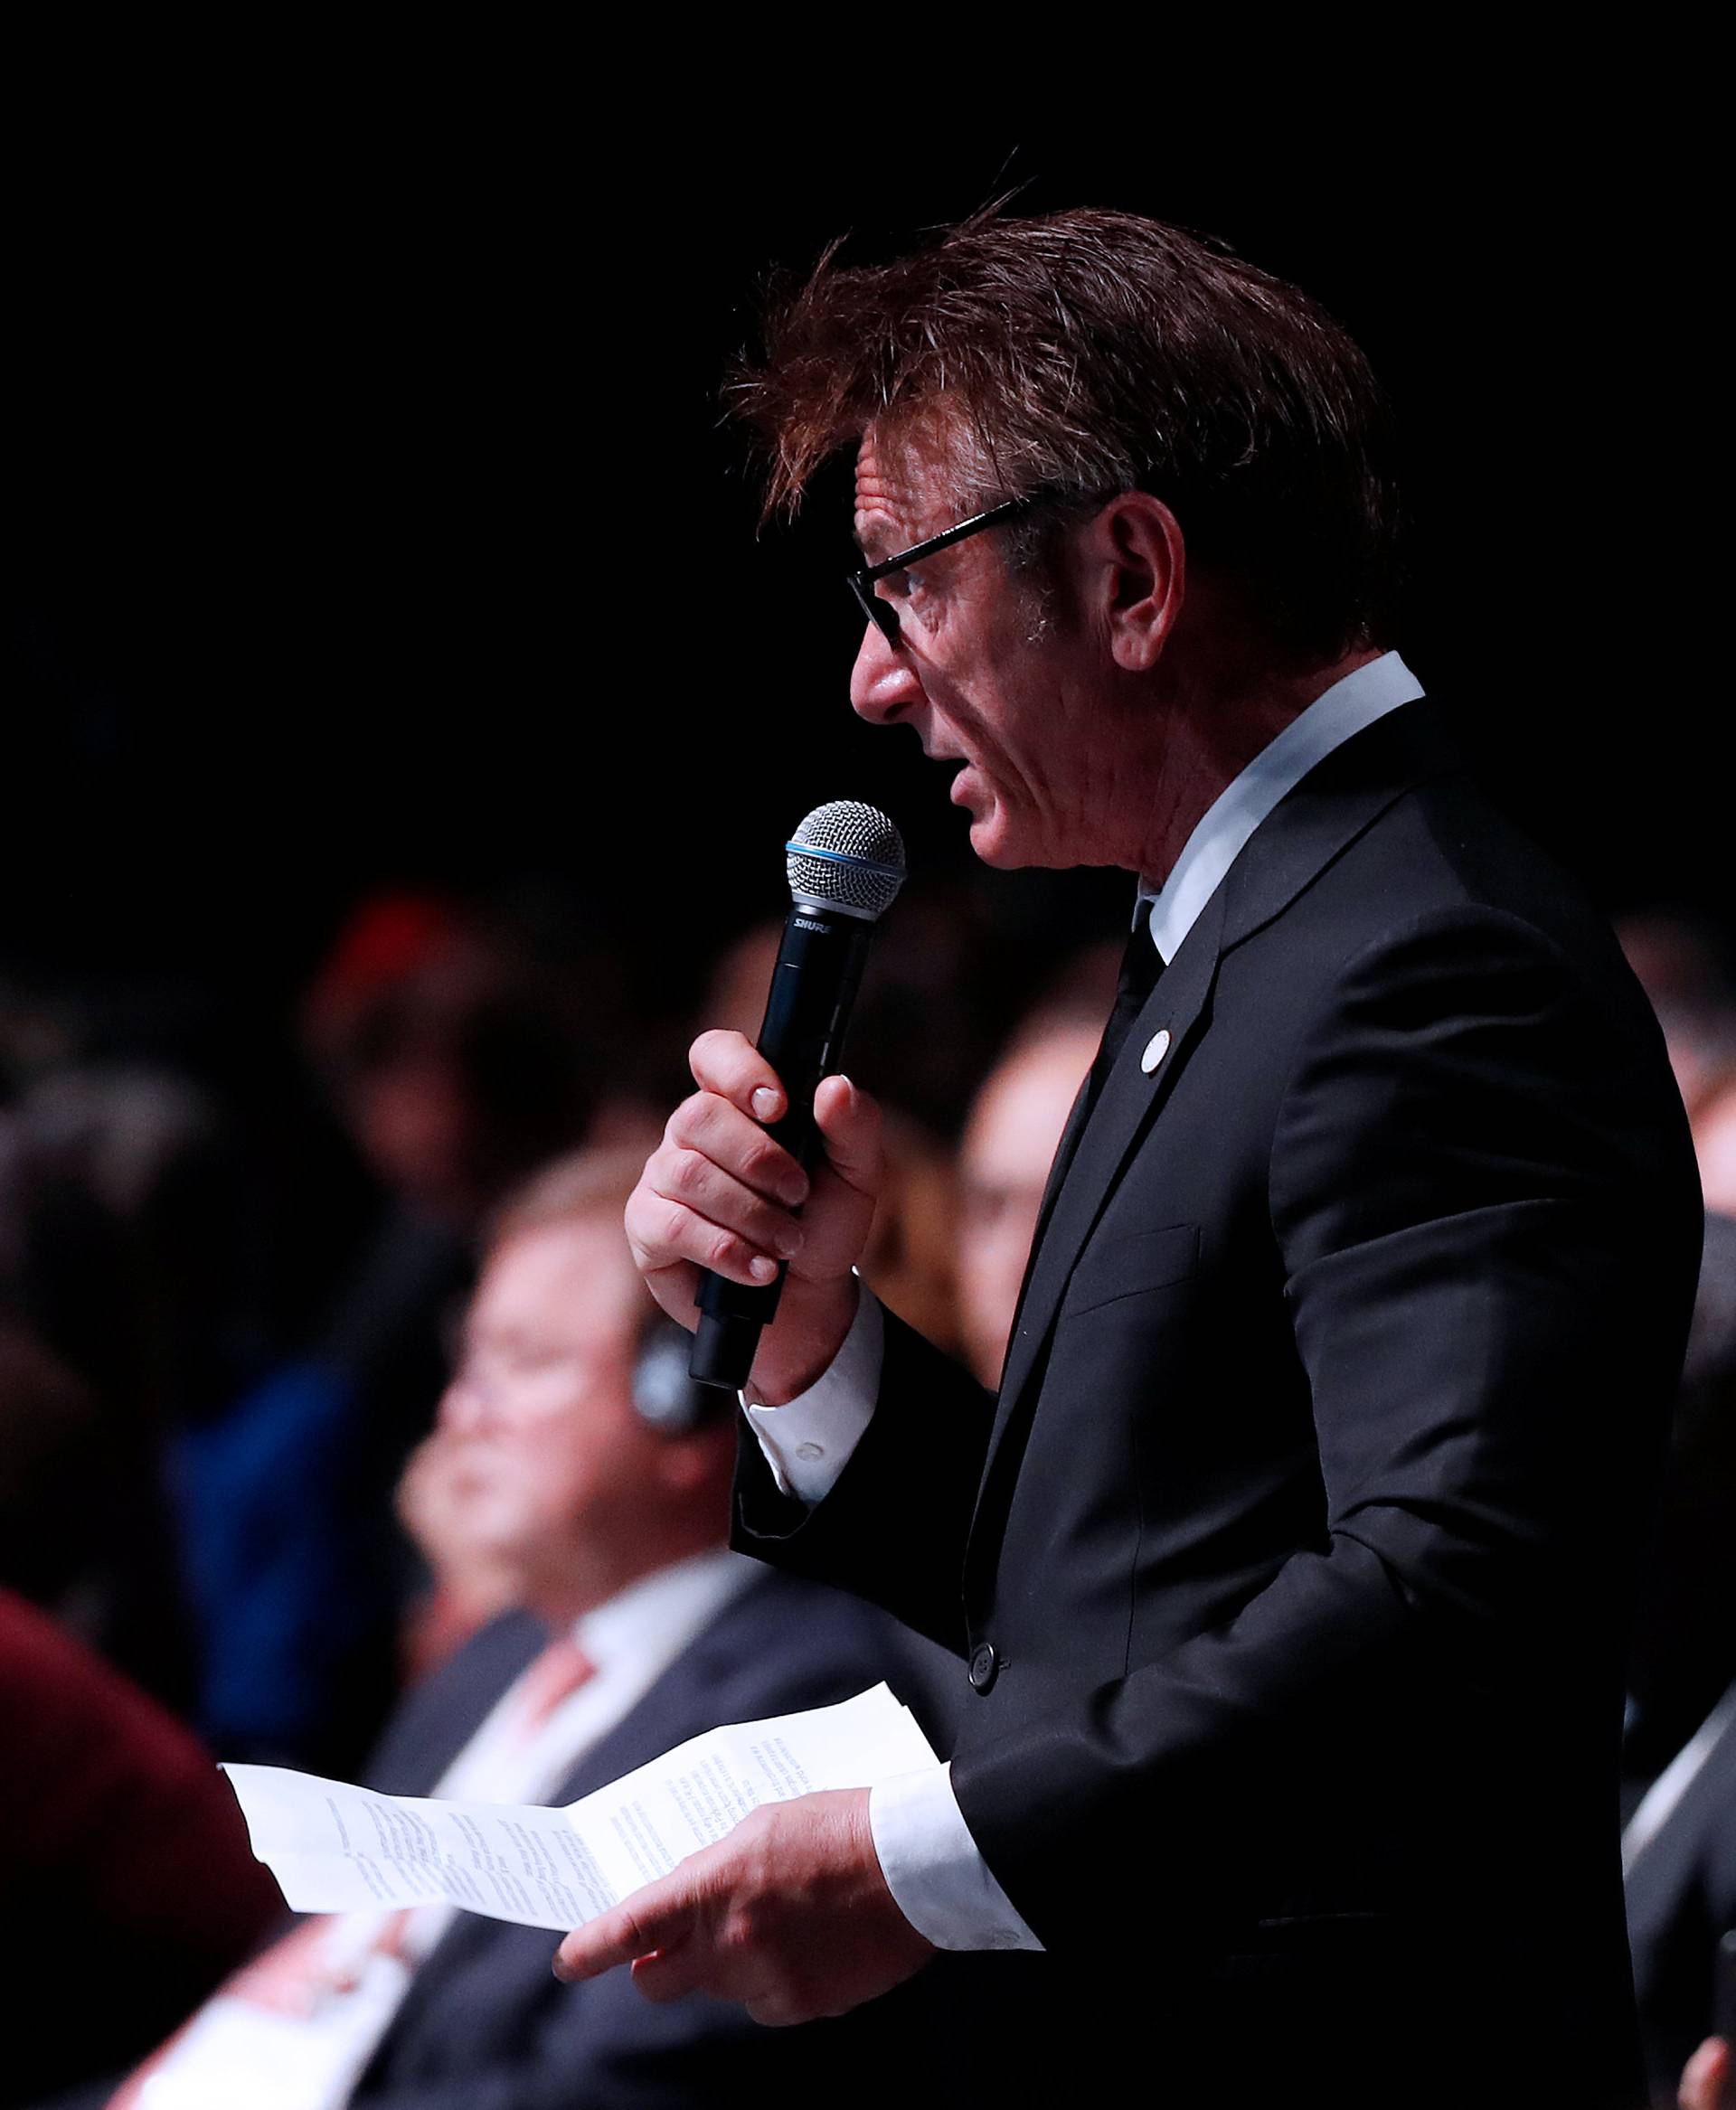 US actor Sean Penn attends the Plenary Session of the One Planet Summit at the Seine Musicale venue in Boulogne-Billancourt